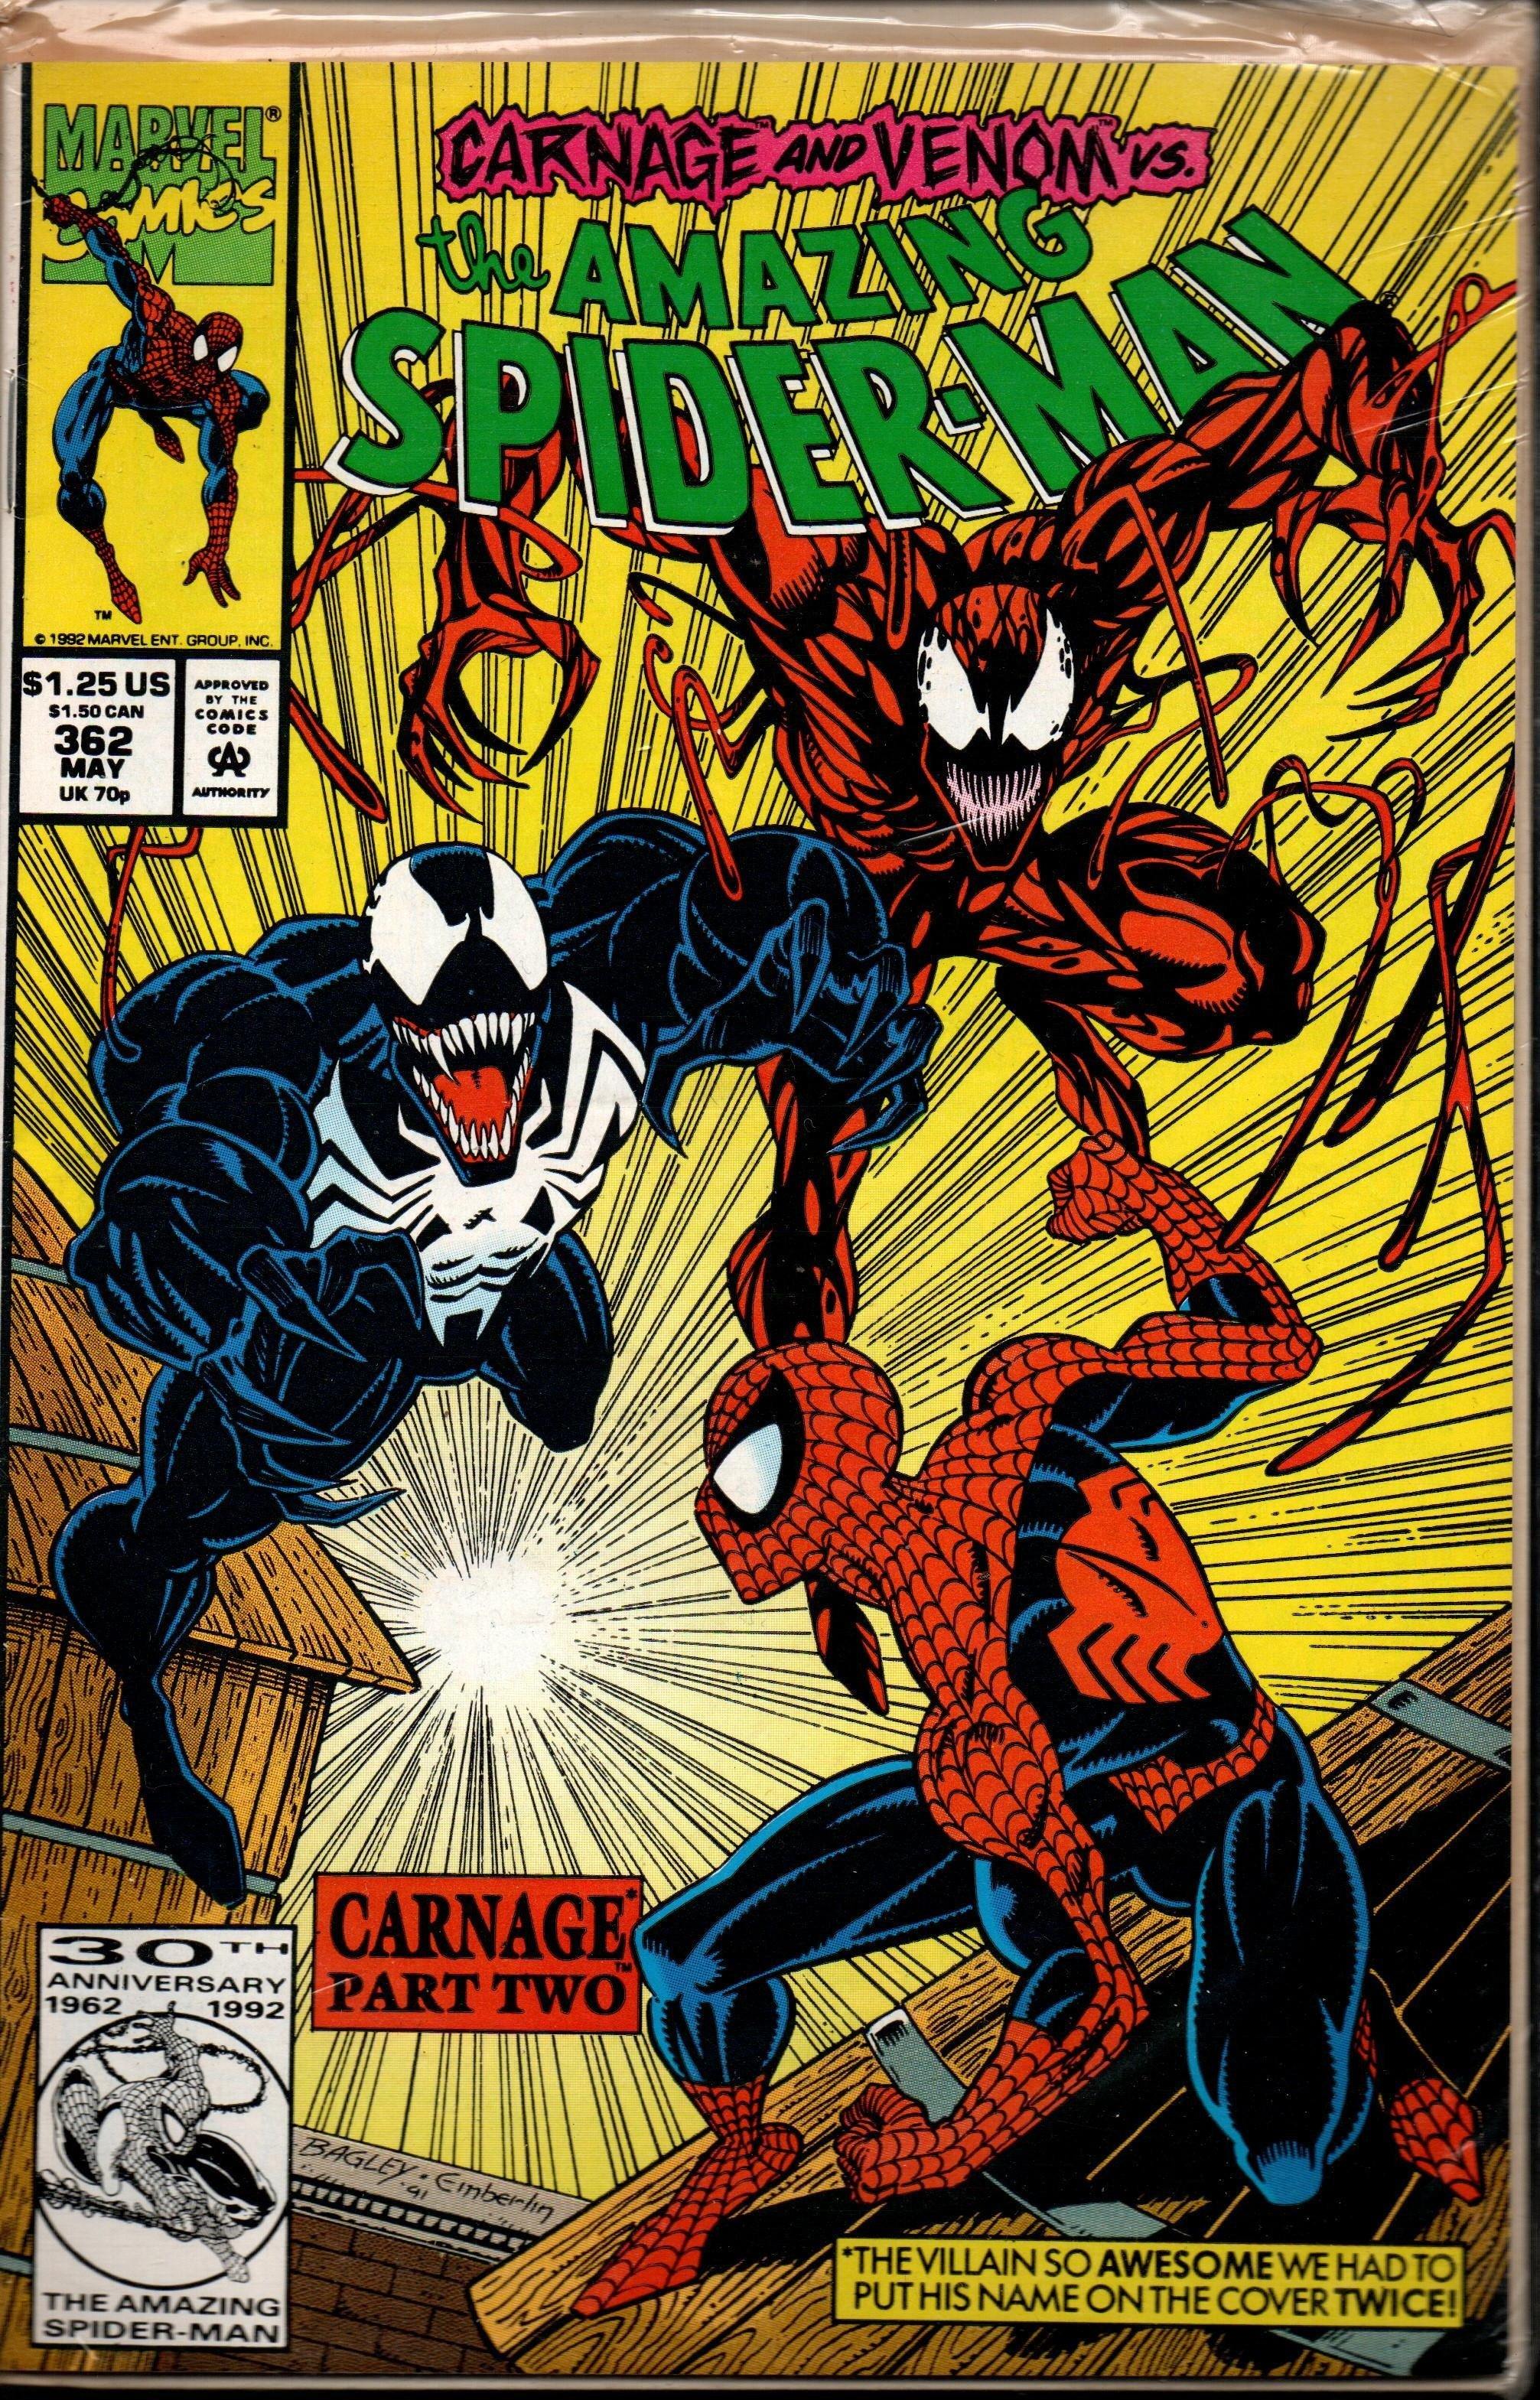 THE AMAZING SPIDER-MAN #362A (1963) MAY 1992